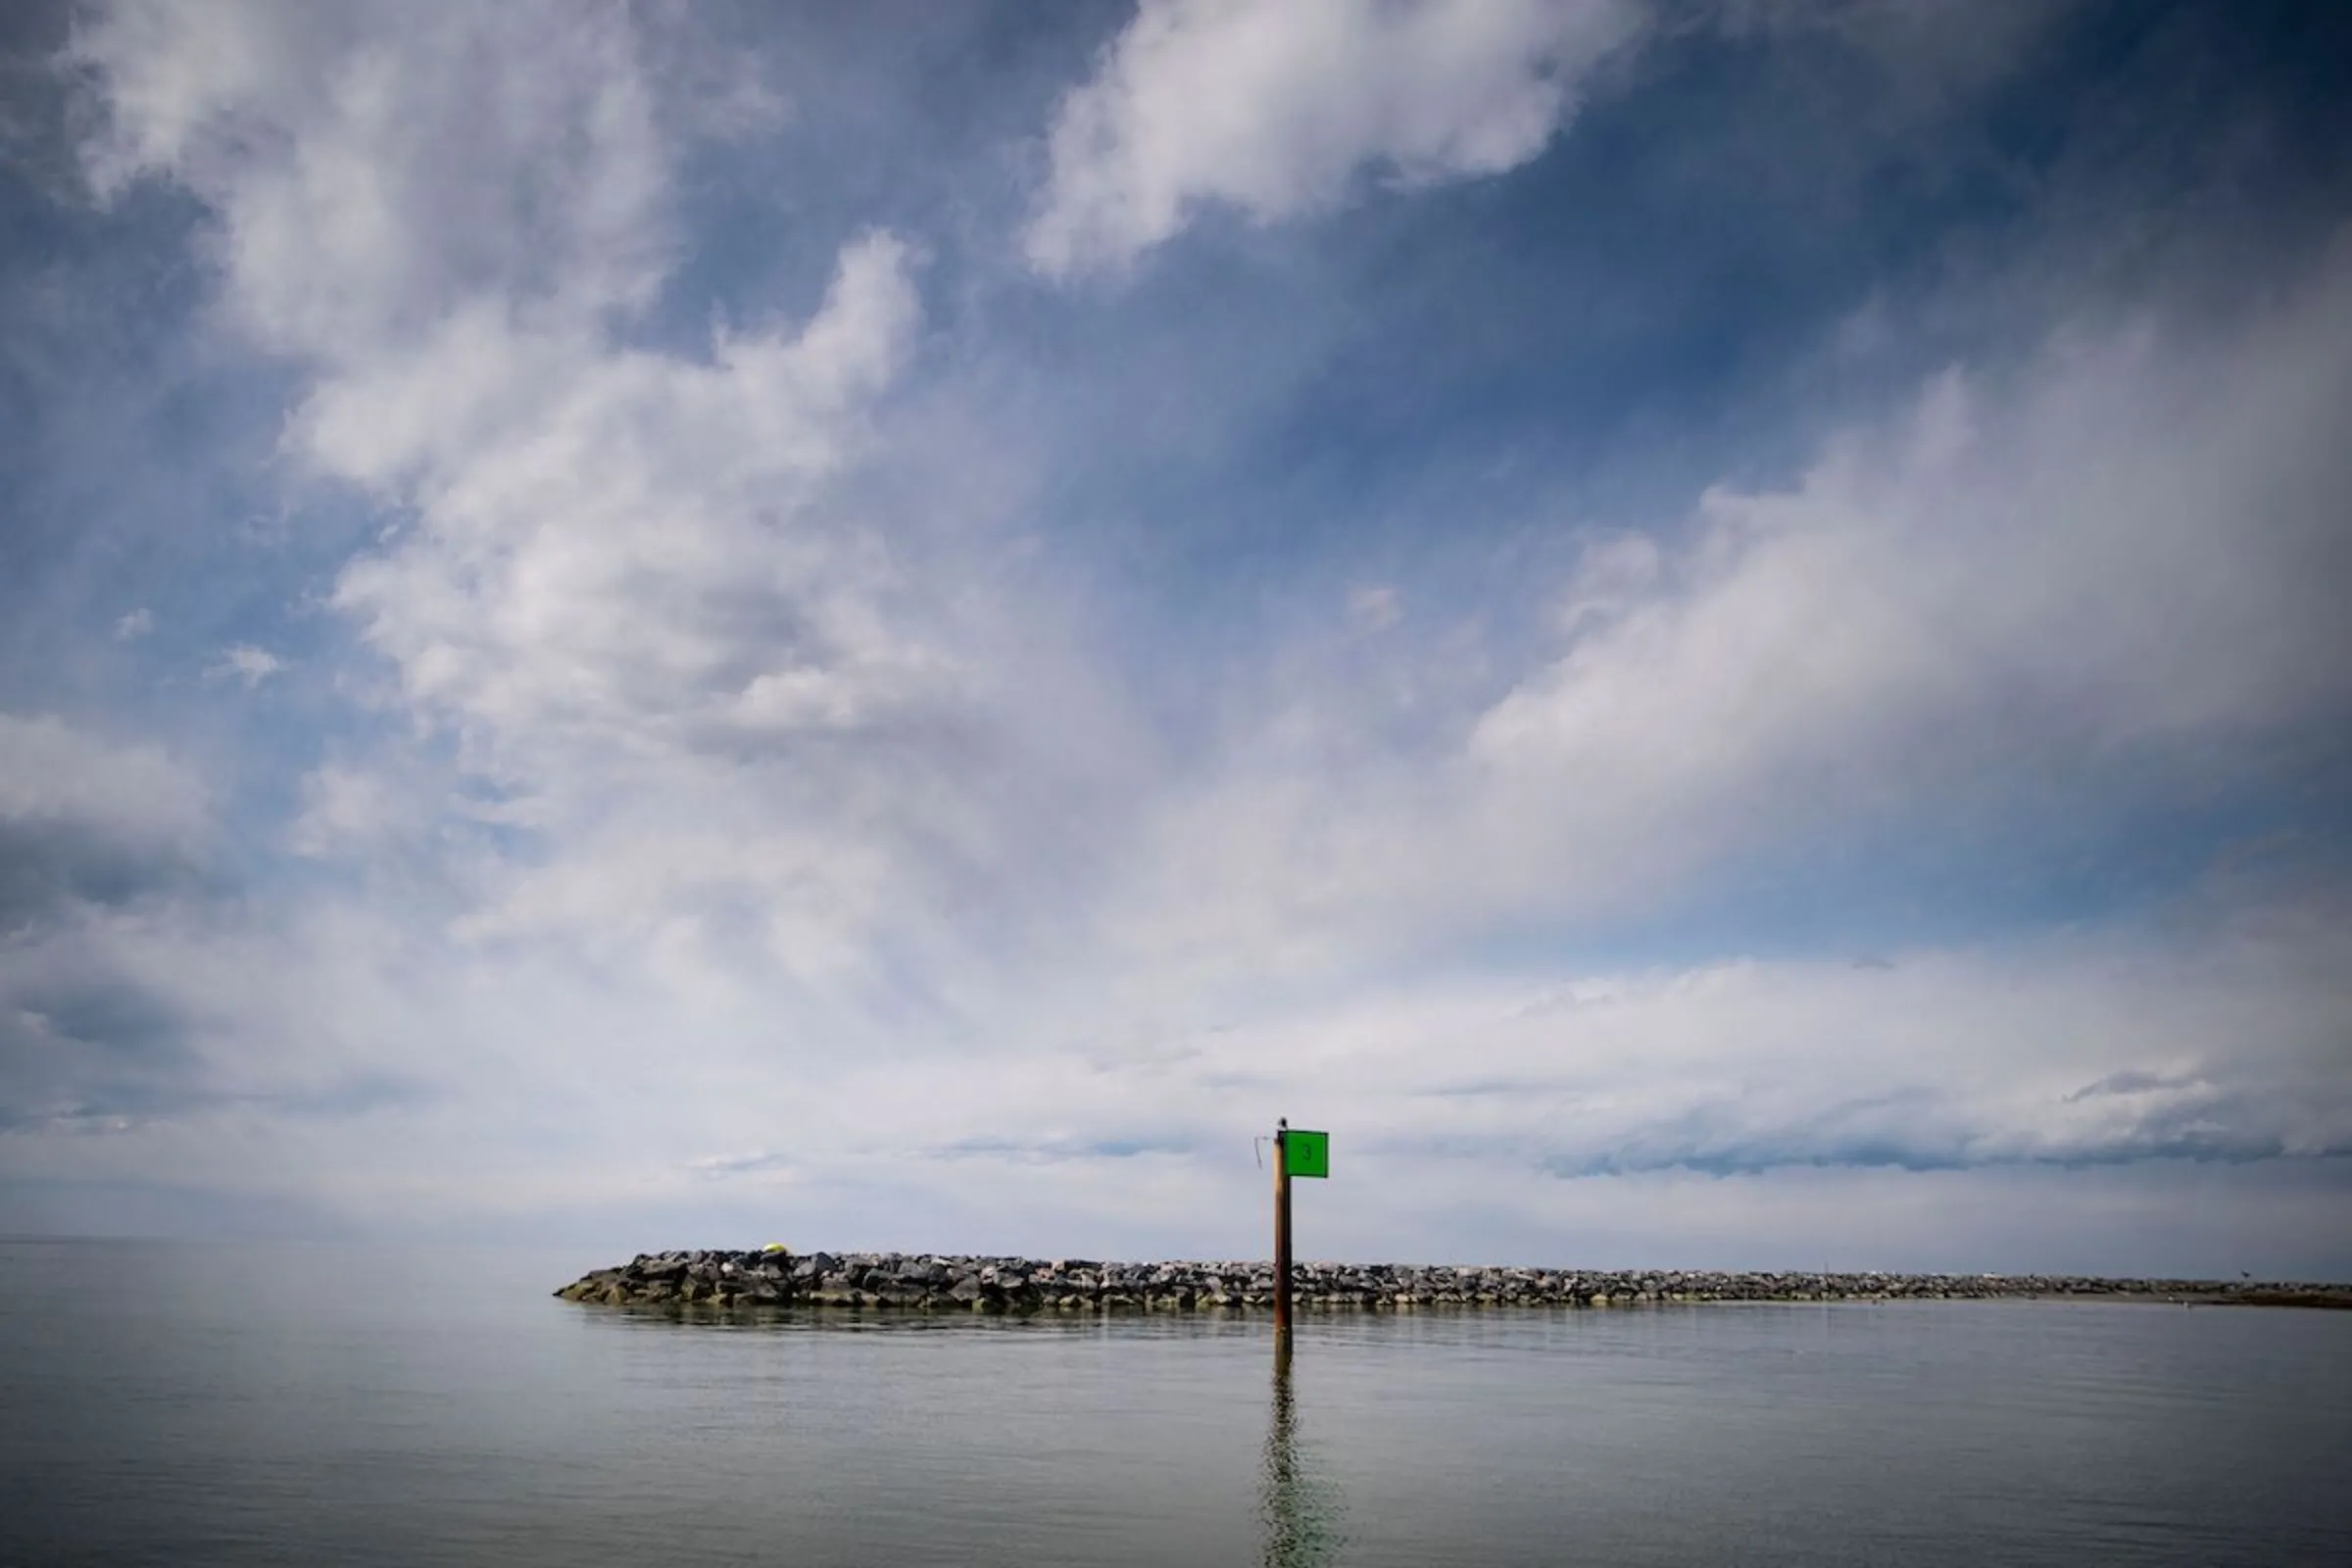 Residents hope that another seawall or jetty can help slow Tangier’s gradual loss of land mass. On the west edge of Tangier Island, Virginia, U.S., March 28, 2022. Thomson Reuters Foundation./Al Drago